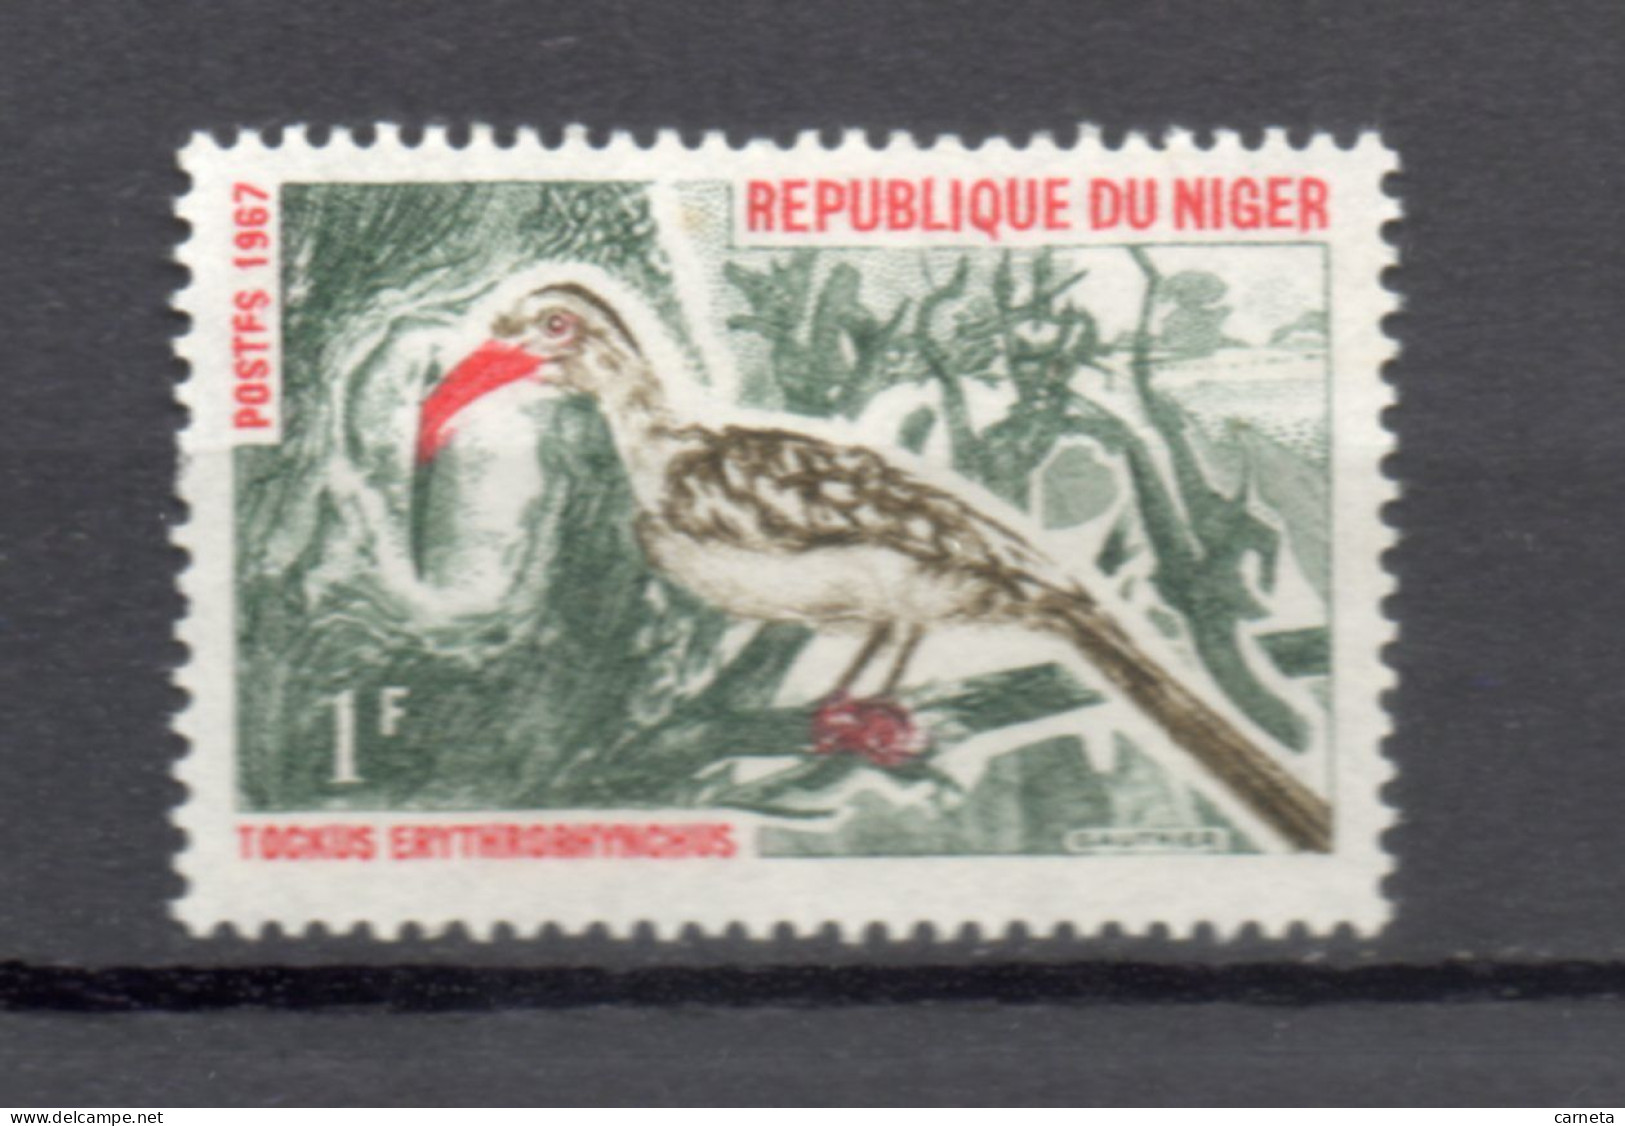 NIGER   N° 190    NEUF SANS CHARNIERE  COTE 0.70€    OISEAUX ANIMAUX FAUNE - Niger (1960-...)